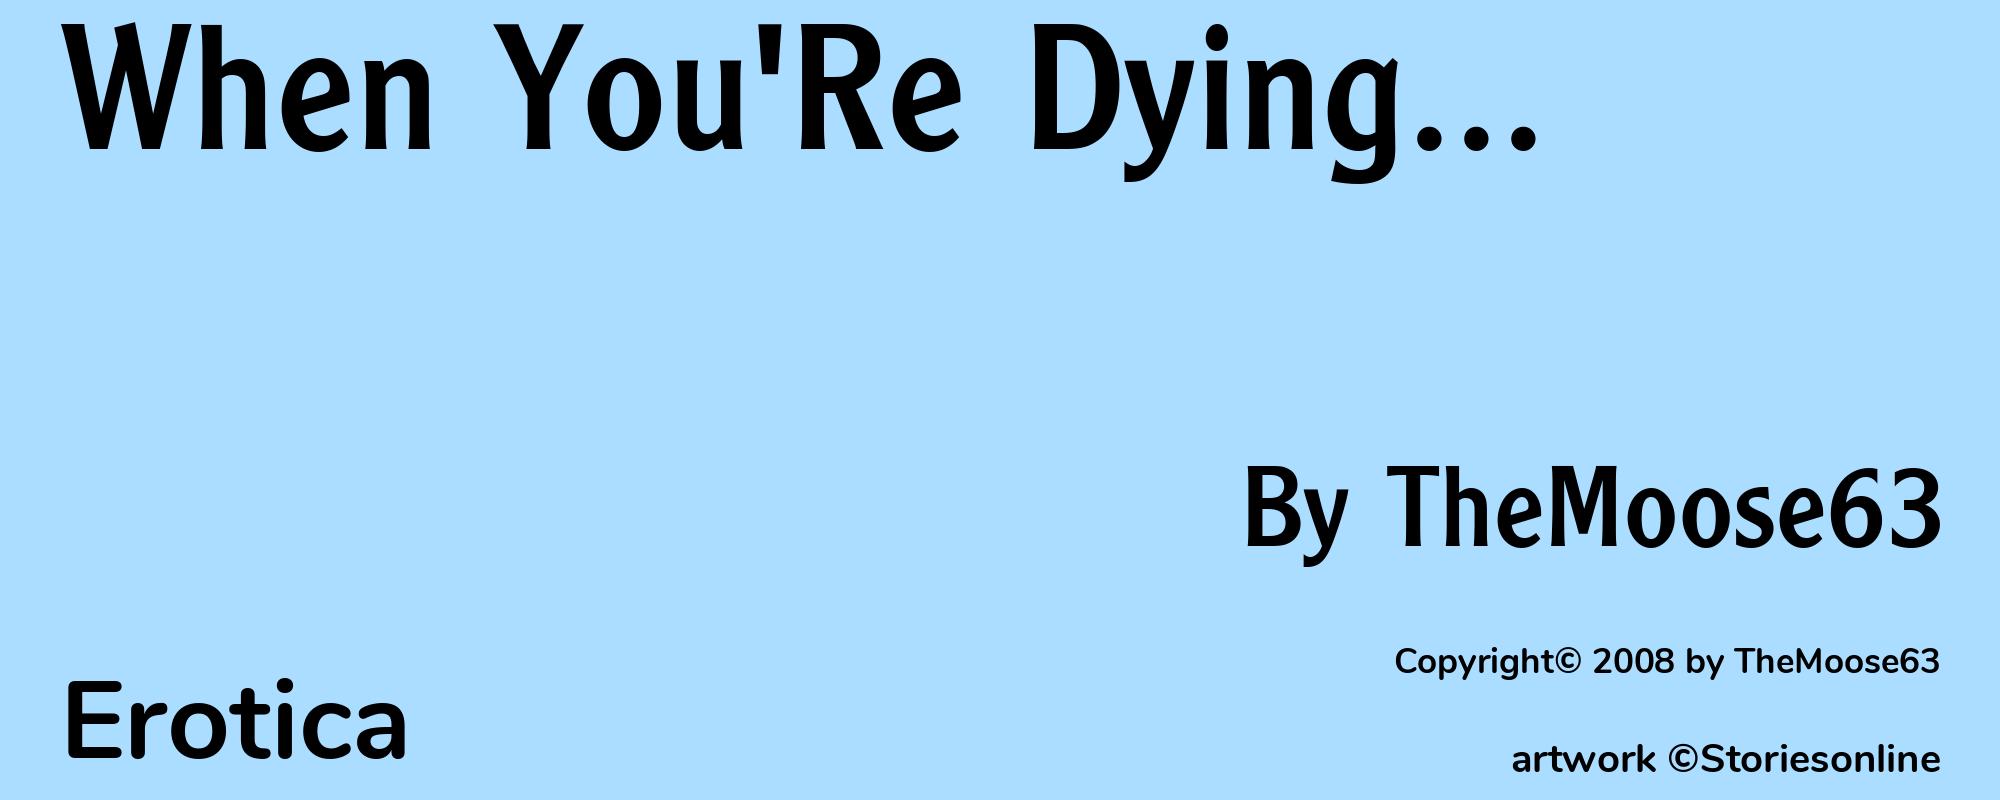 When You'Re Dying... - Cover